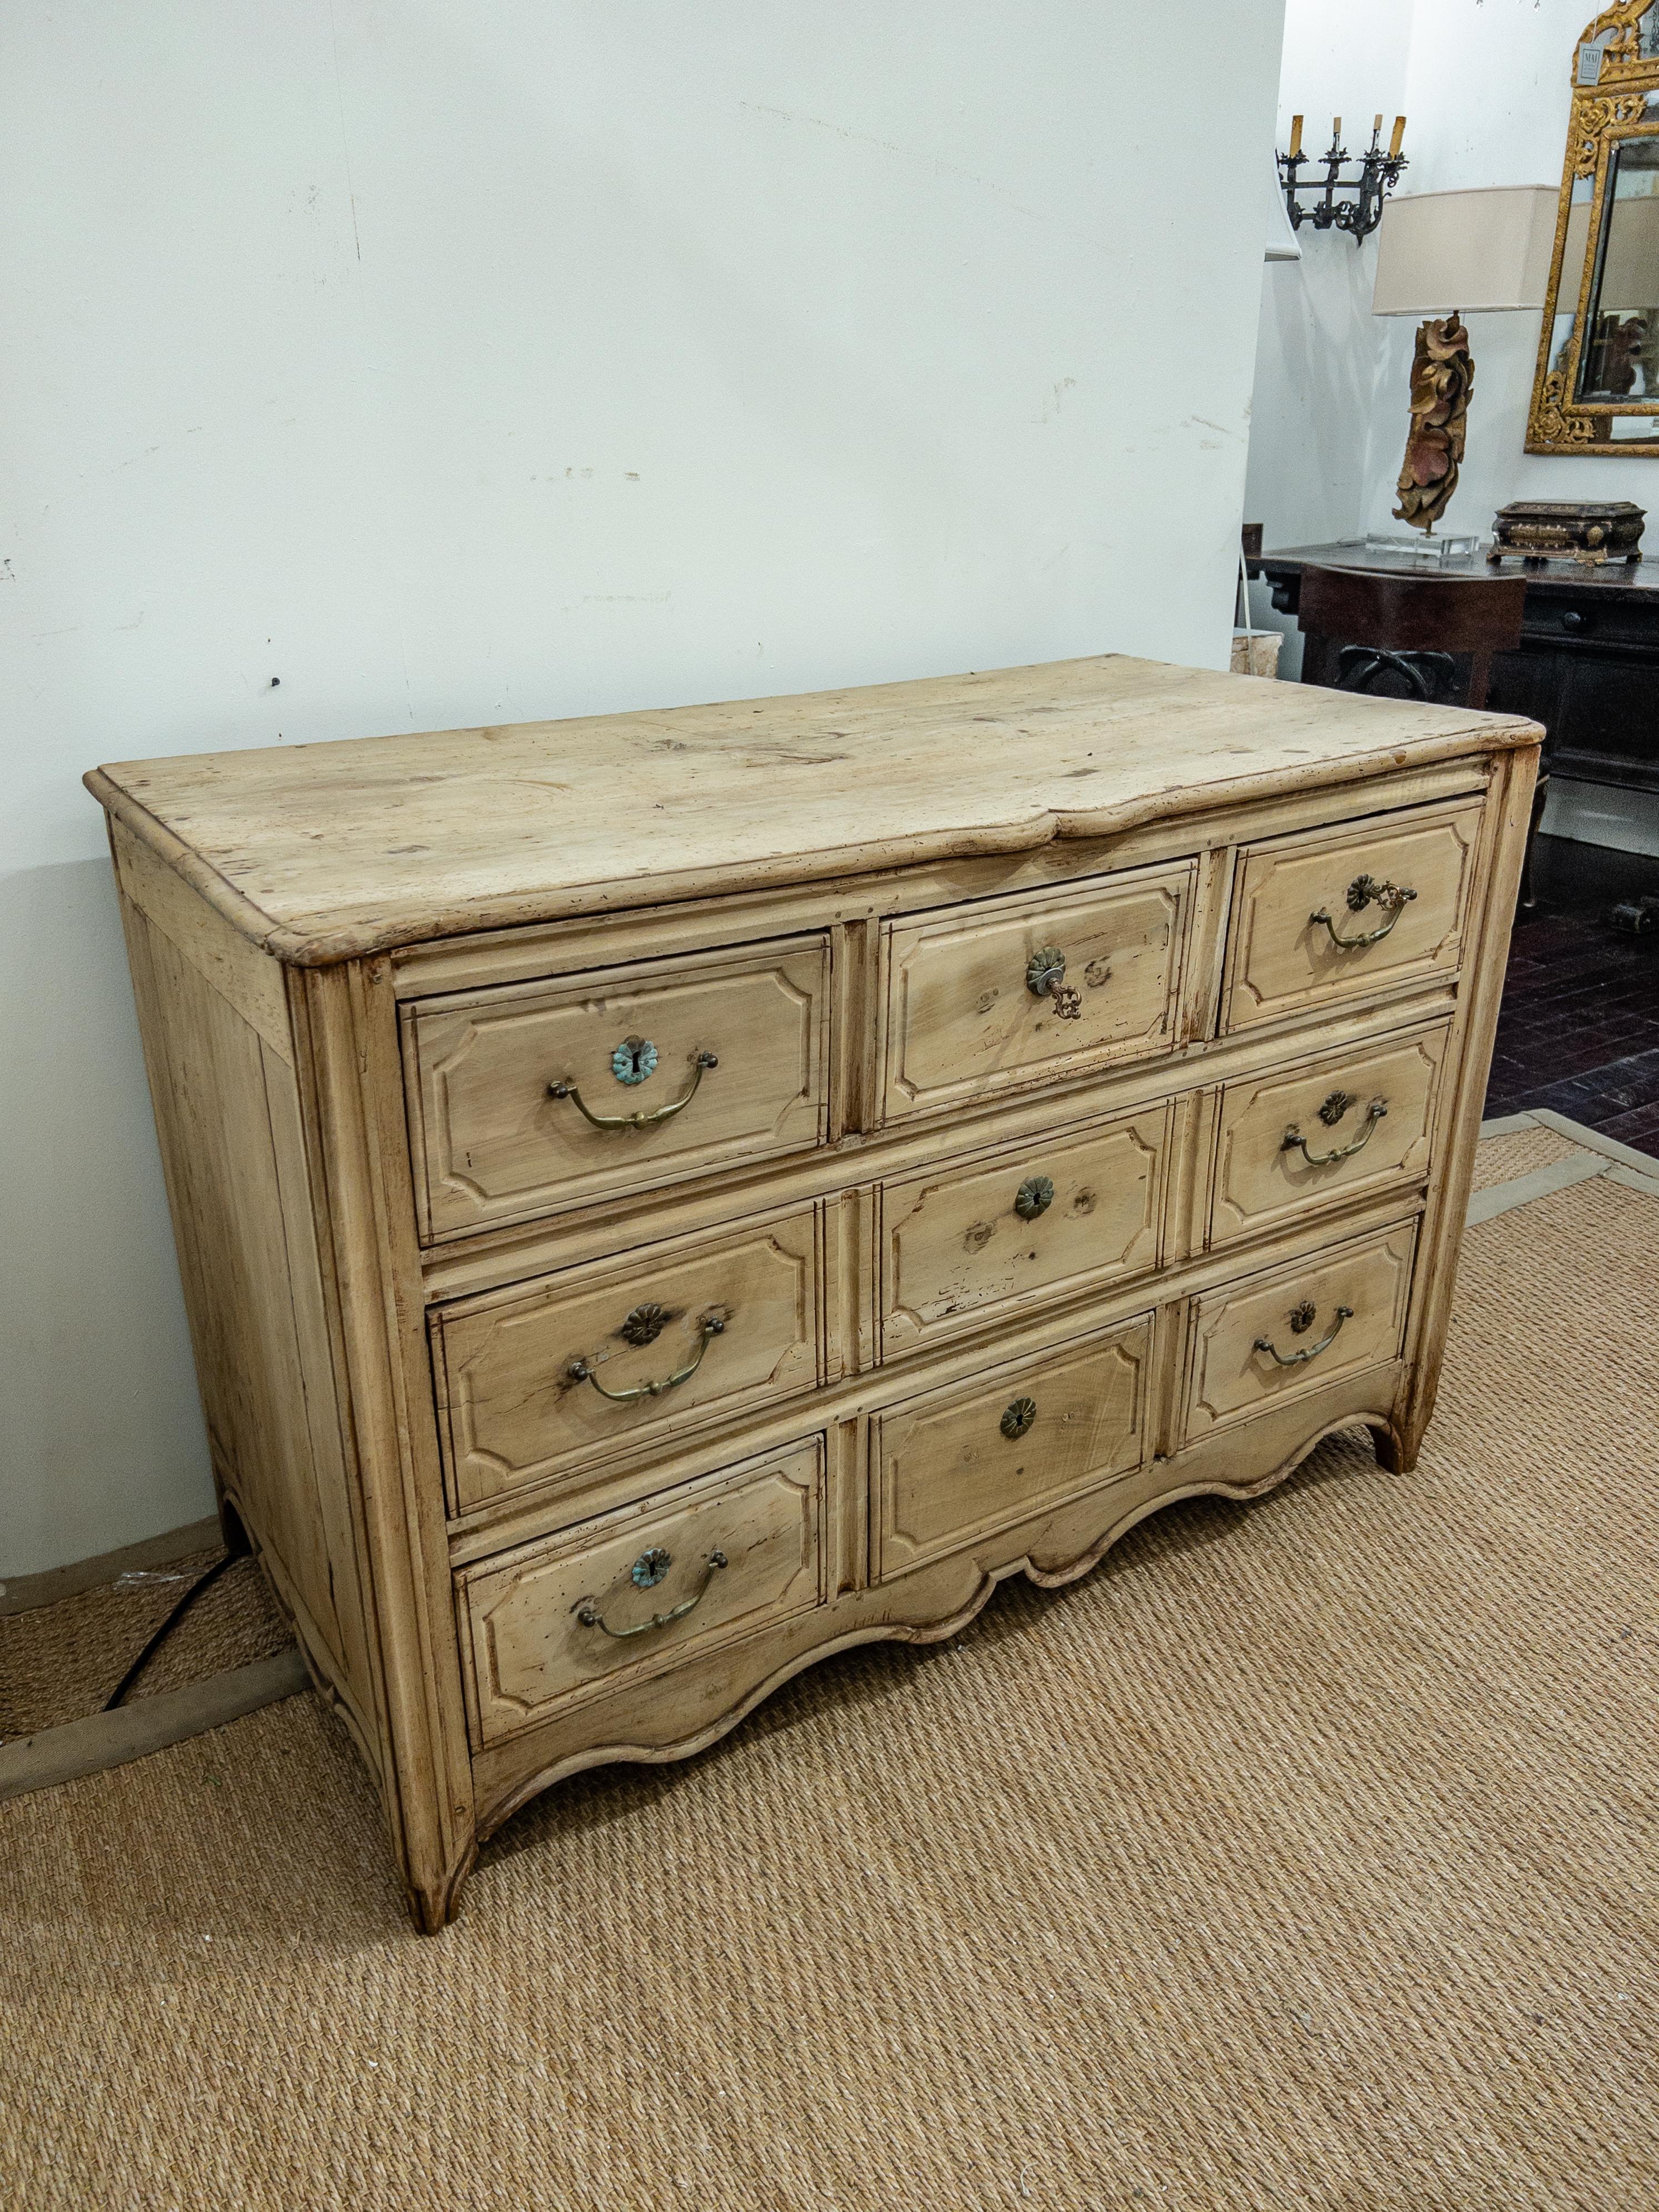 The 19th-century Louis XV style French commode is an elegant and ornate piece of furniture. It is crafted from lightened walnut, giving it a beautiful and warm hue. The commode features brass hardware, adding a touch of luxury and sophistication.